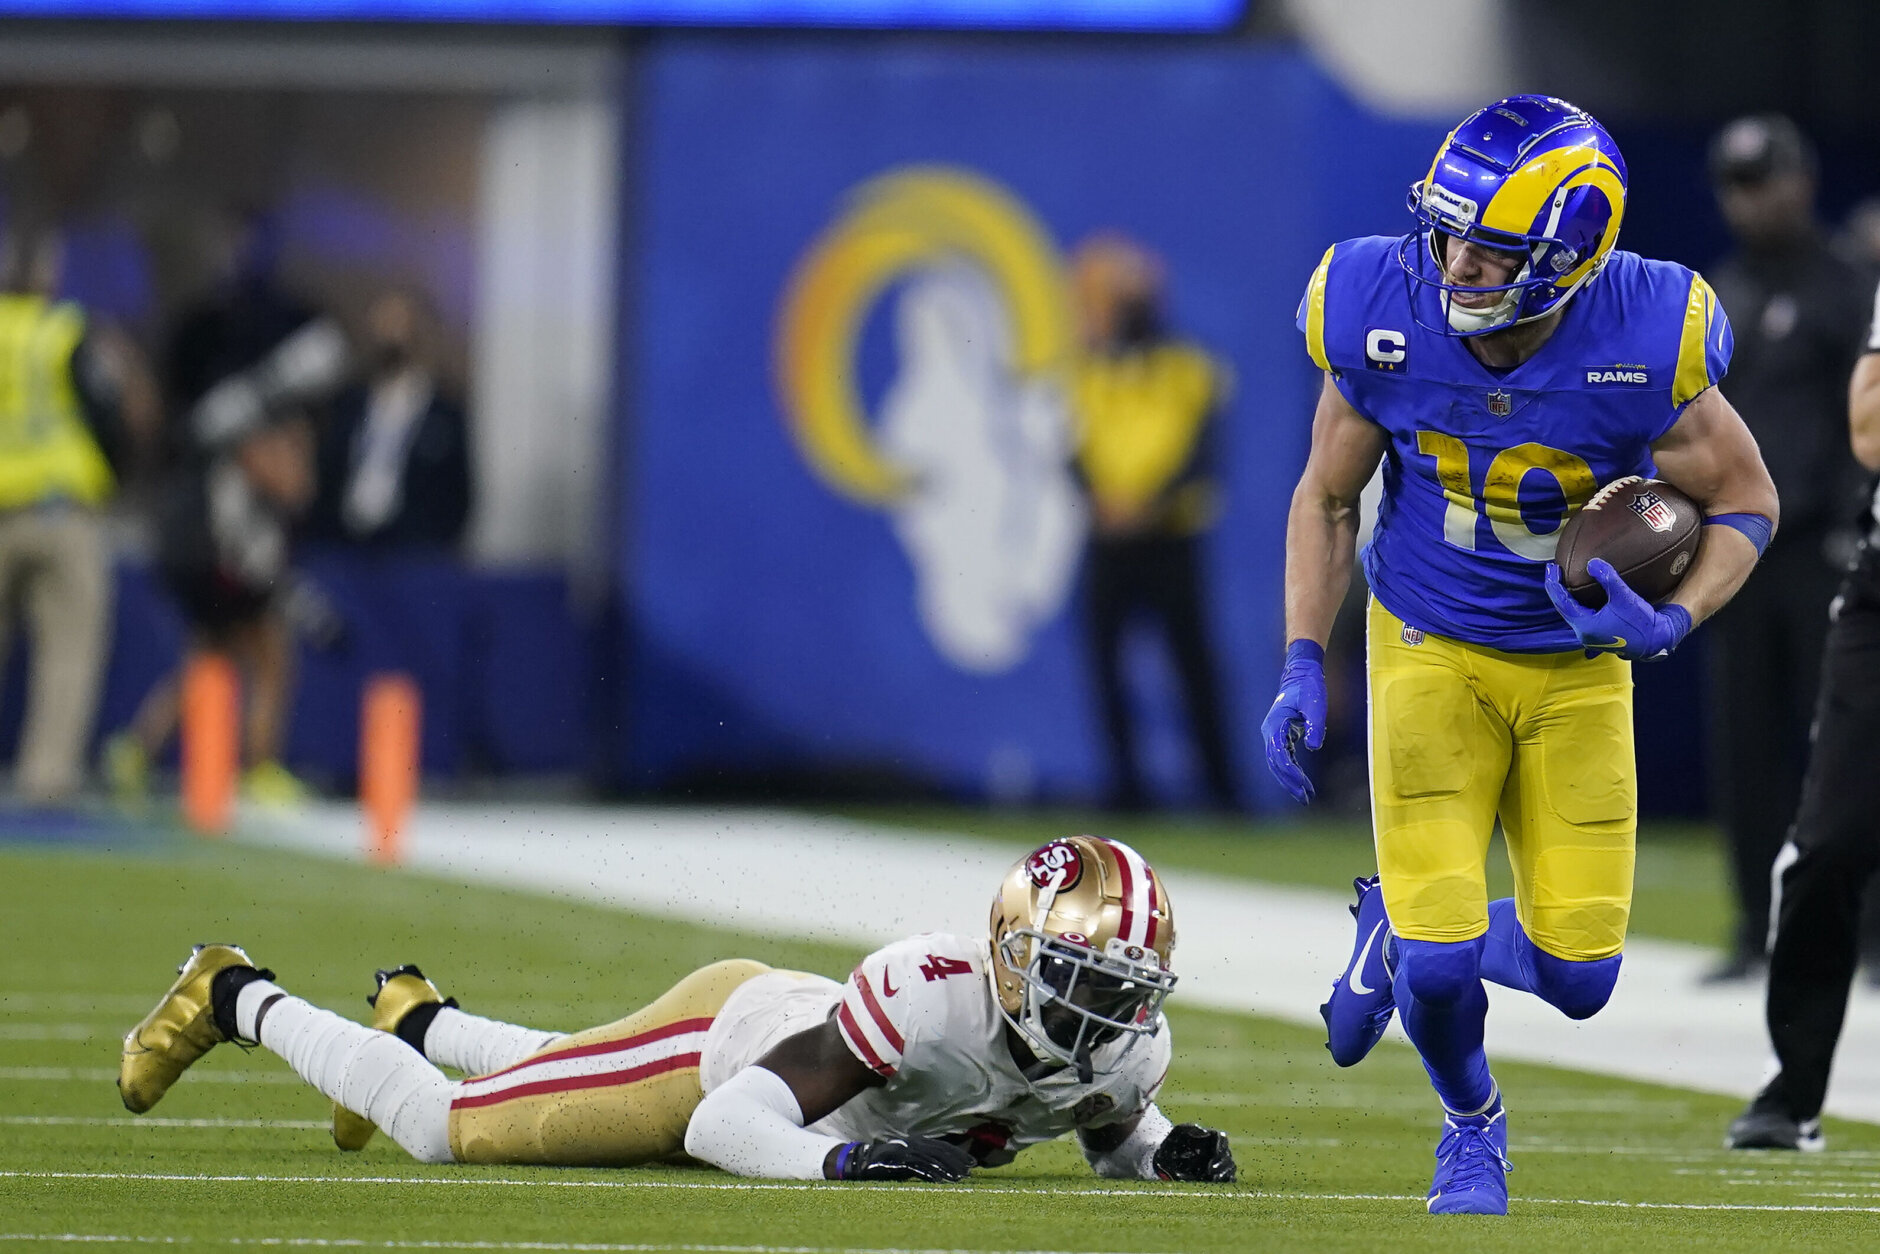 <p><em><strong>49ers 17</strong></em><br />
<em><strong>Rams 20</strong></em></p>
<p>Los Angeles beat some long odds to become the second-straight NFL team to play a Super Bowl in its home stadium.</p>
<p>The Rams had lost six straight to San Francisco. Fourteen of the previous 22 teams to lose the first two games to a division rival in the regular season went on to lose the playoff meeting as well. Sean McVay&#8217;s teams <a href="https://twitter.com/ESPNStatsInfo/status/1487965940767674370?s=20&amp;t=ZwGM27_DxHf3YQ-SXbiy6w">are all but finished</a> when trailing double digits in the second half. L.A.&#8217;s <a href="https://www.latimes.com/sports/rams/story/2022-01-25/rams-fans-49ers-sofi-stadium-nfc-championship-nfl-playoffs" target="_blank" rel="noopener">fears about the crowd</a> were realized, as they basically played a road game at home.</p>
<p>But the stars shone bright in Tinseltown, none brighter than Cooper Kupp (a.k.a., <a href="https://deadspin.com/cooper-kupp-is-the-nfl-s-most-valuable-player-he-just-1848410376" target="_blank" rel="noopener">The Real MVP</a>). And Jimmy G proved again why the &#8216;G&#8217; will soon stand for &#8216;gone.&#8217; Matthew Stafford will make the Rams a sentimental Super Bowl favorite — and they&#8217;d better win it now because it might just be their best shot at championship glory before Trey Lance makes the Niners a juggernaut.</p>
